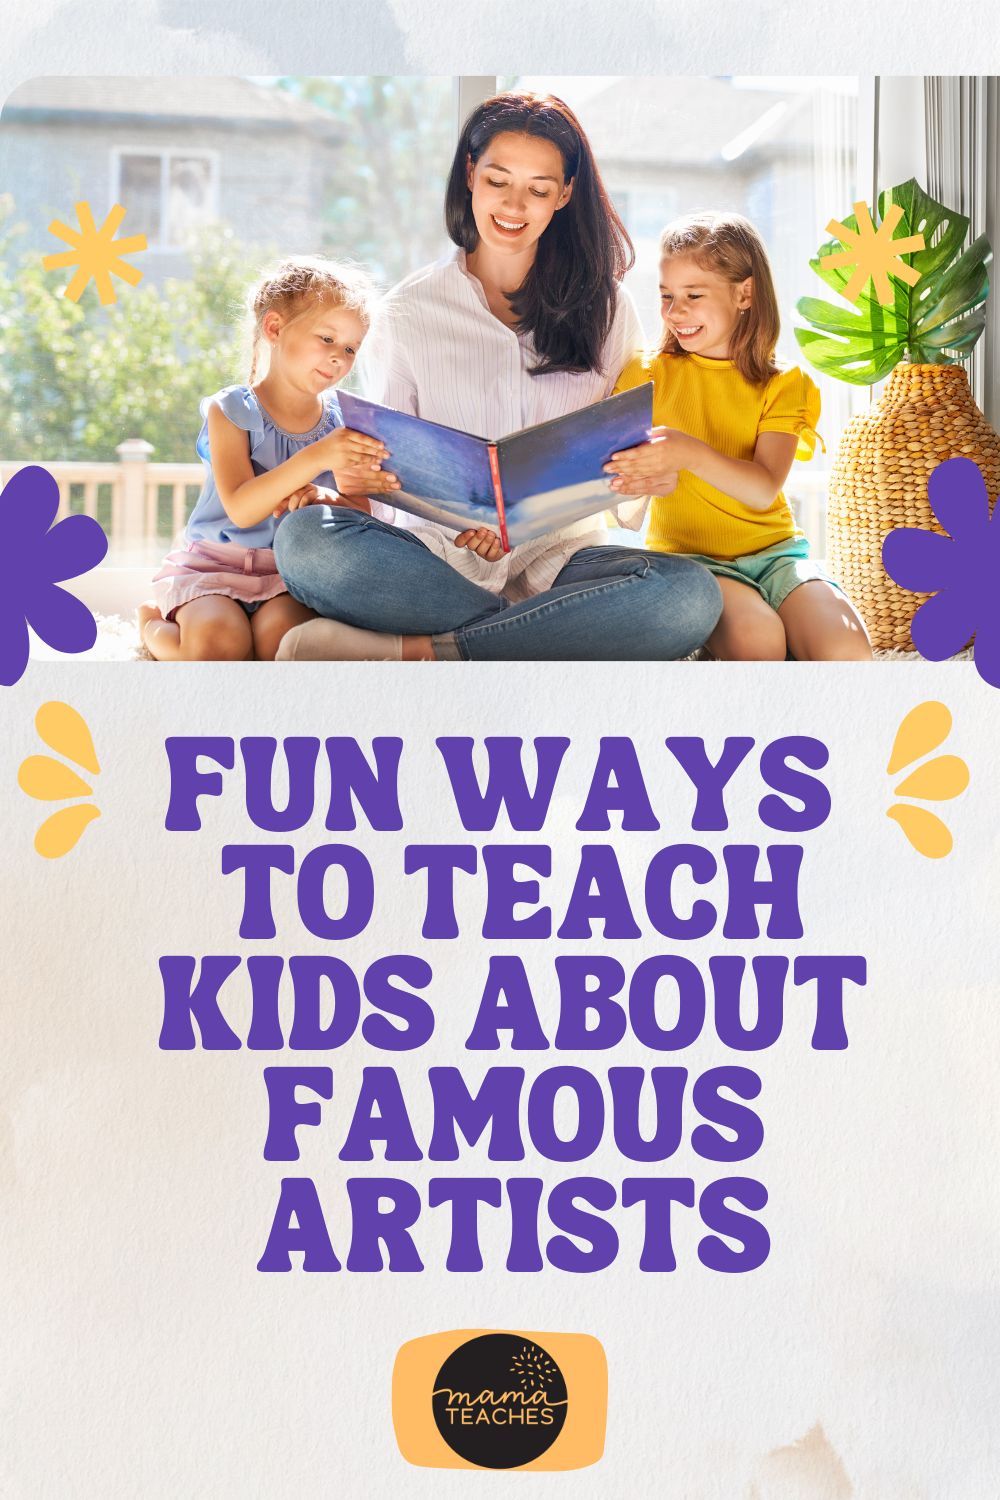 Fun Ways to Teach Kids About Famous Artists